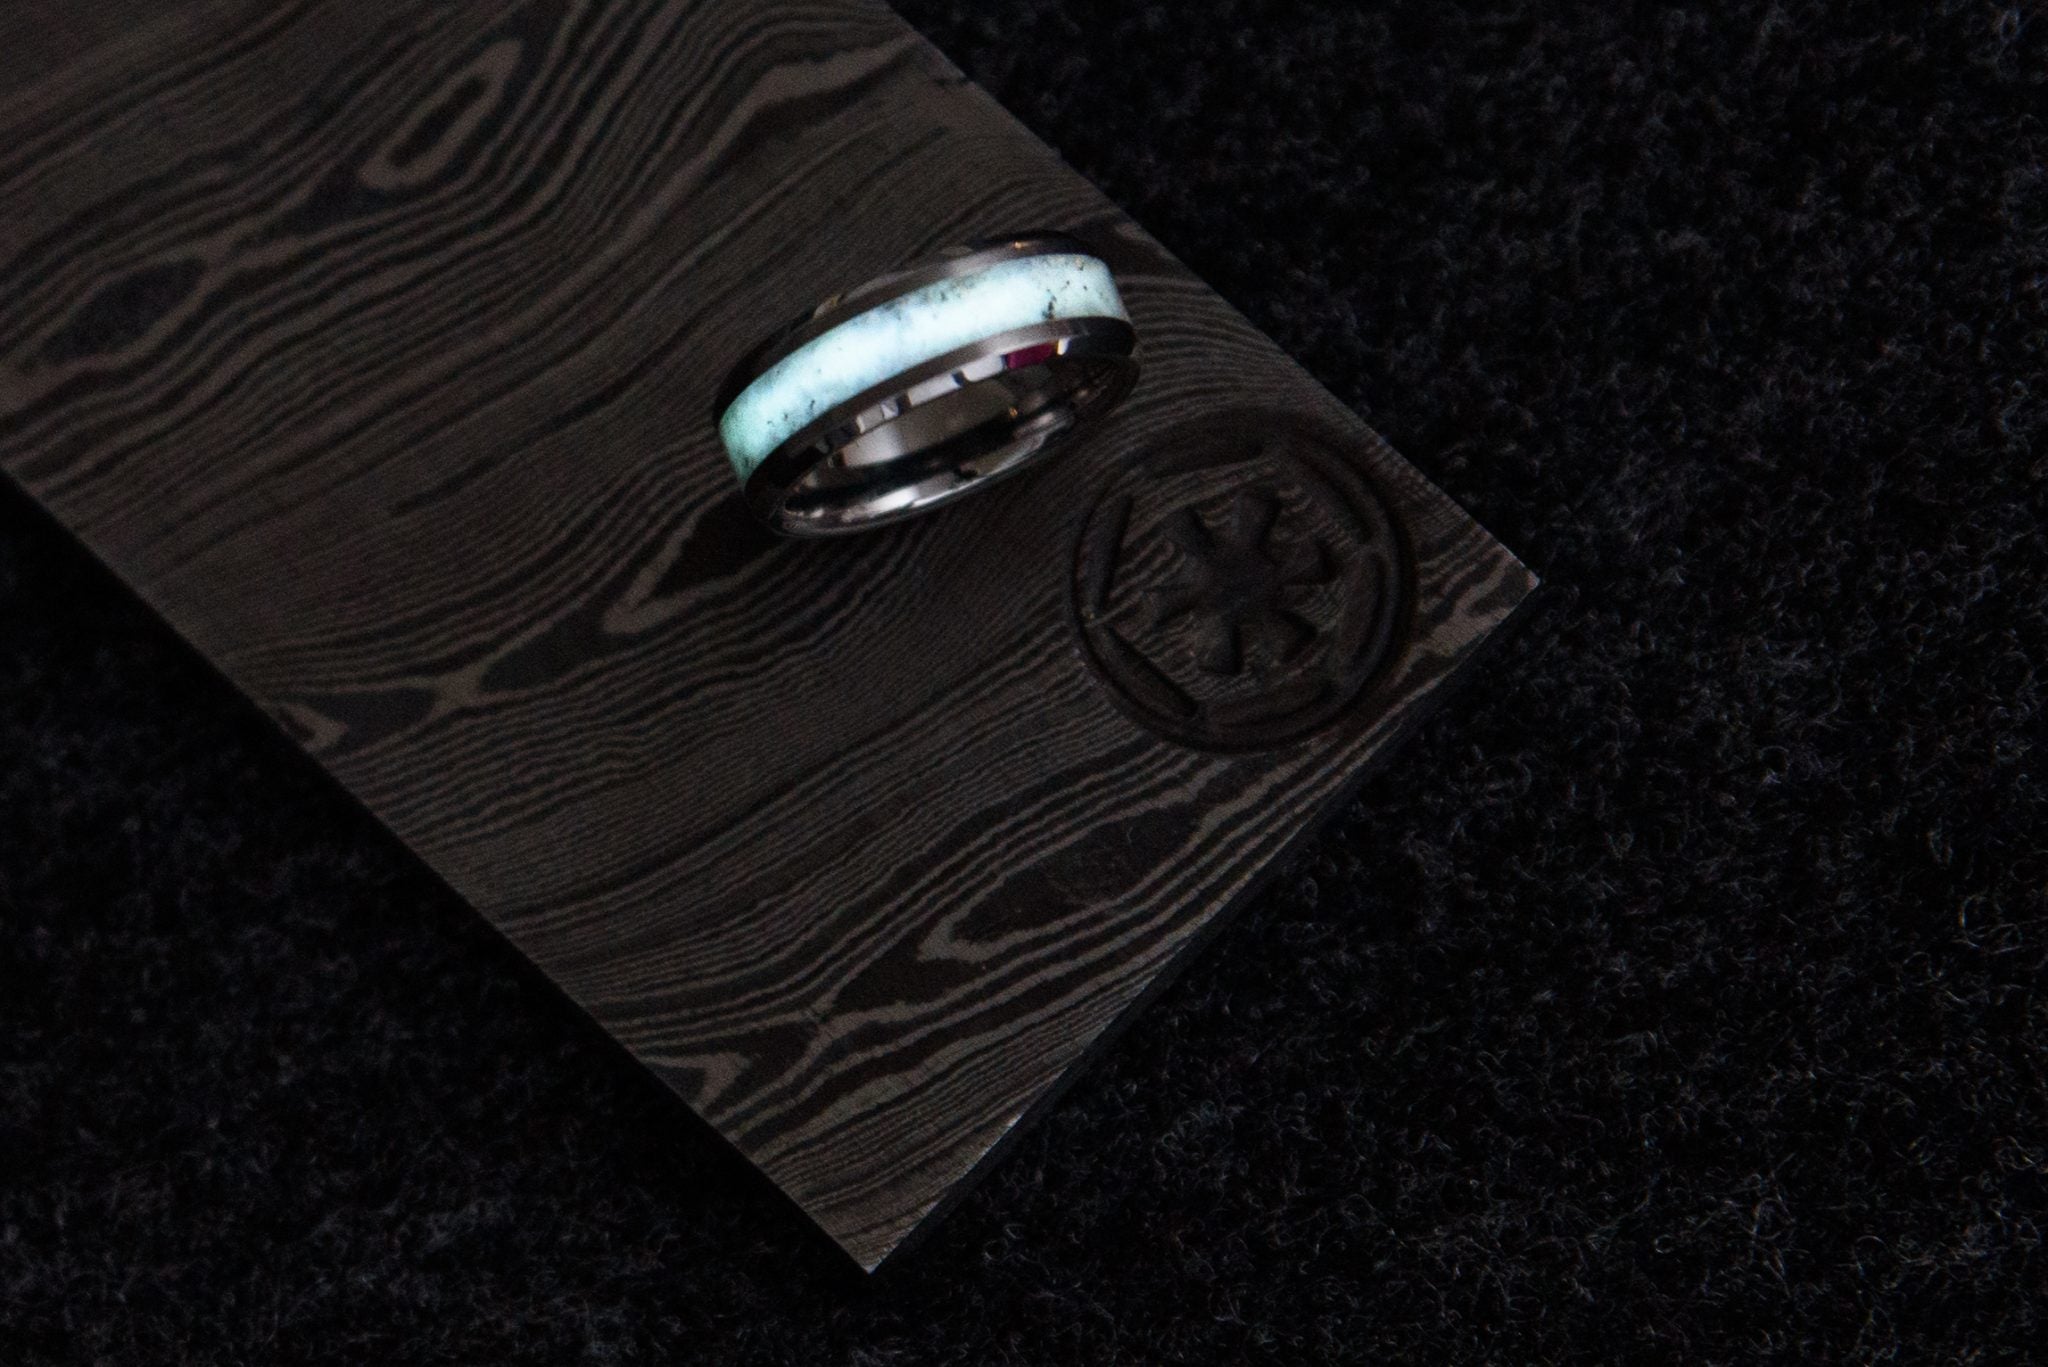 Making a Glowing Emerald and Damascus Steel Wedding Band - YouTube